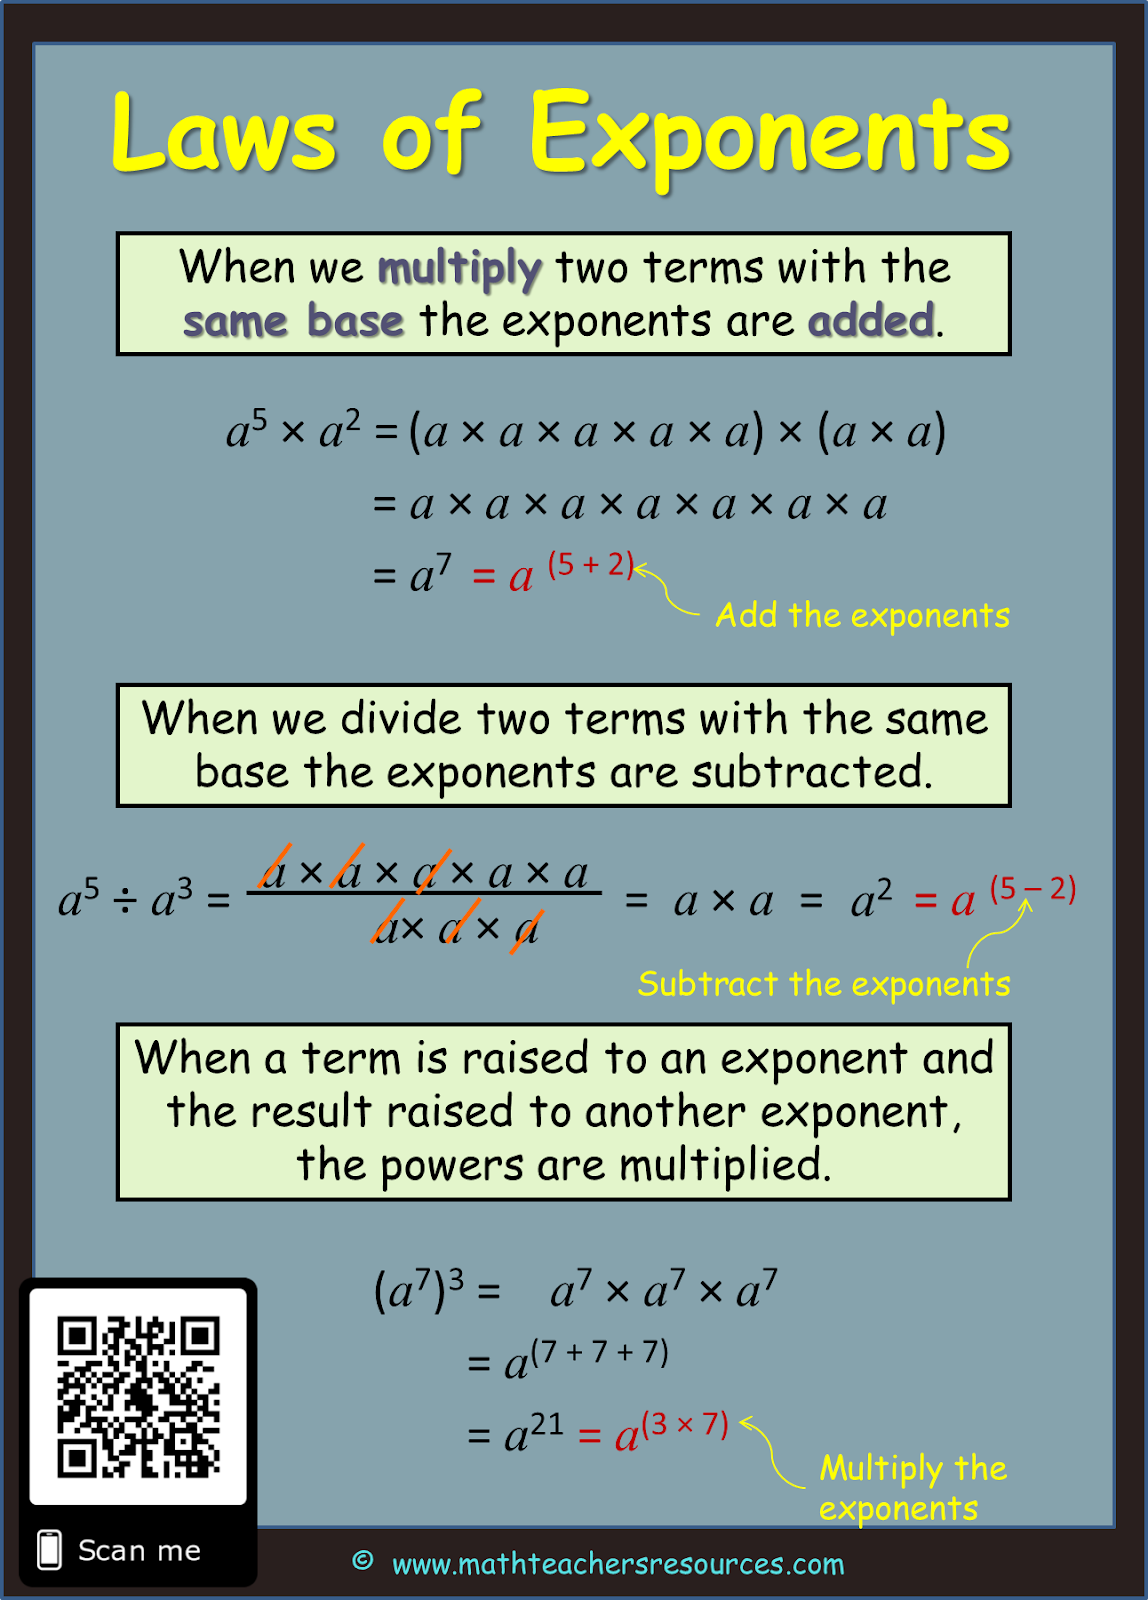 rules-of-exponents-tentors-math-teacher-resources